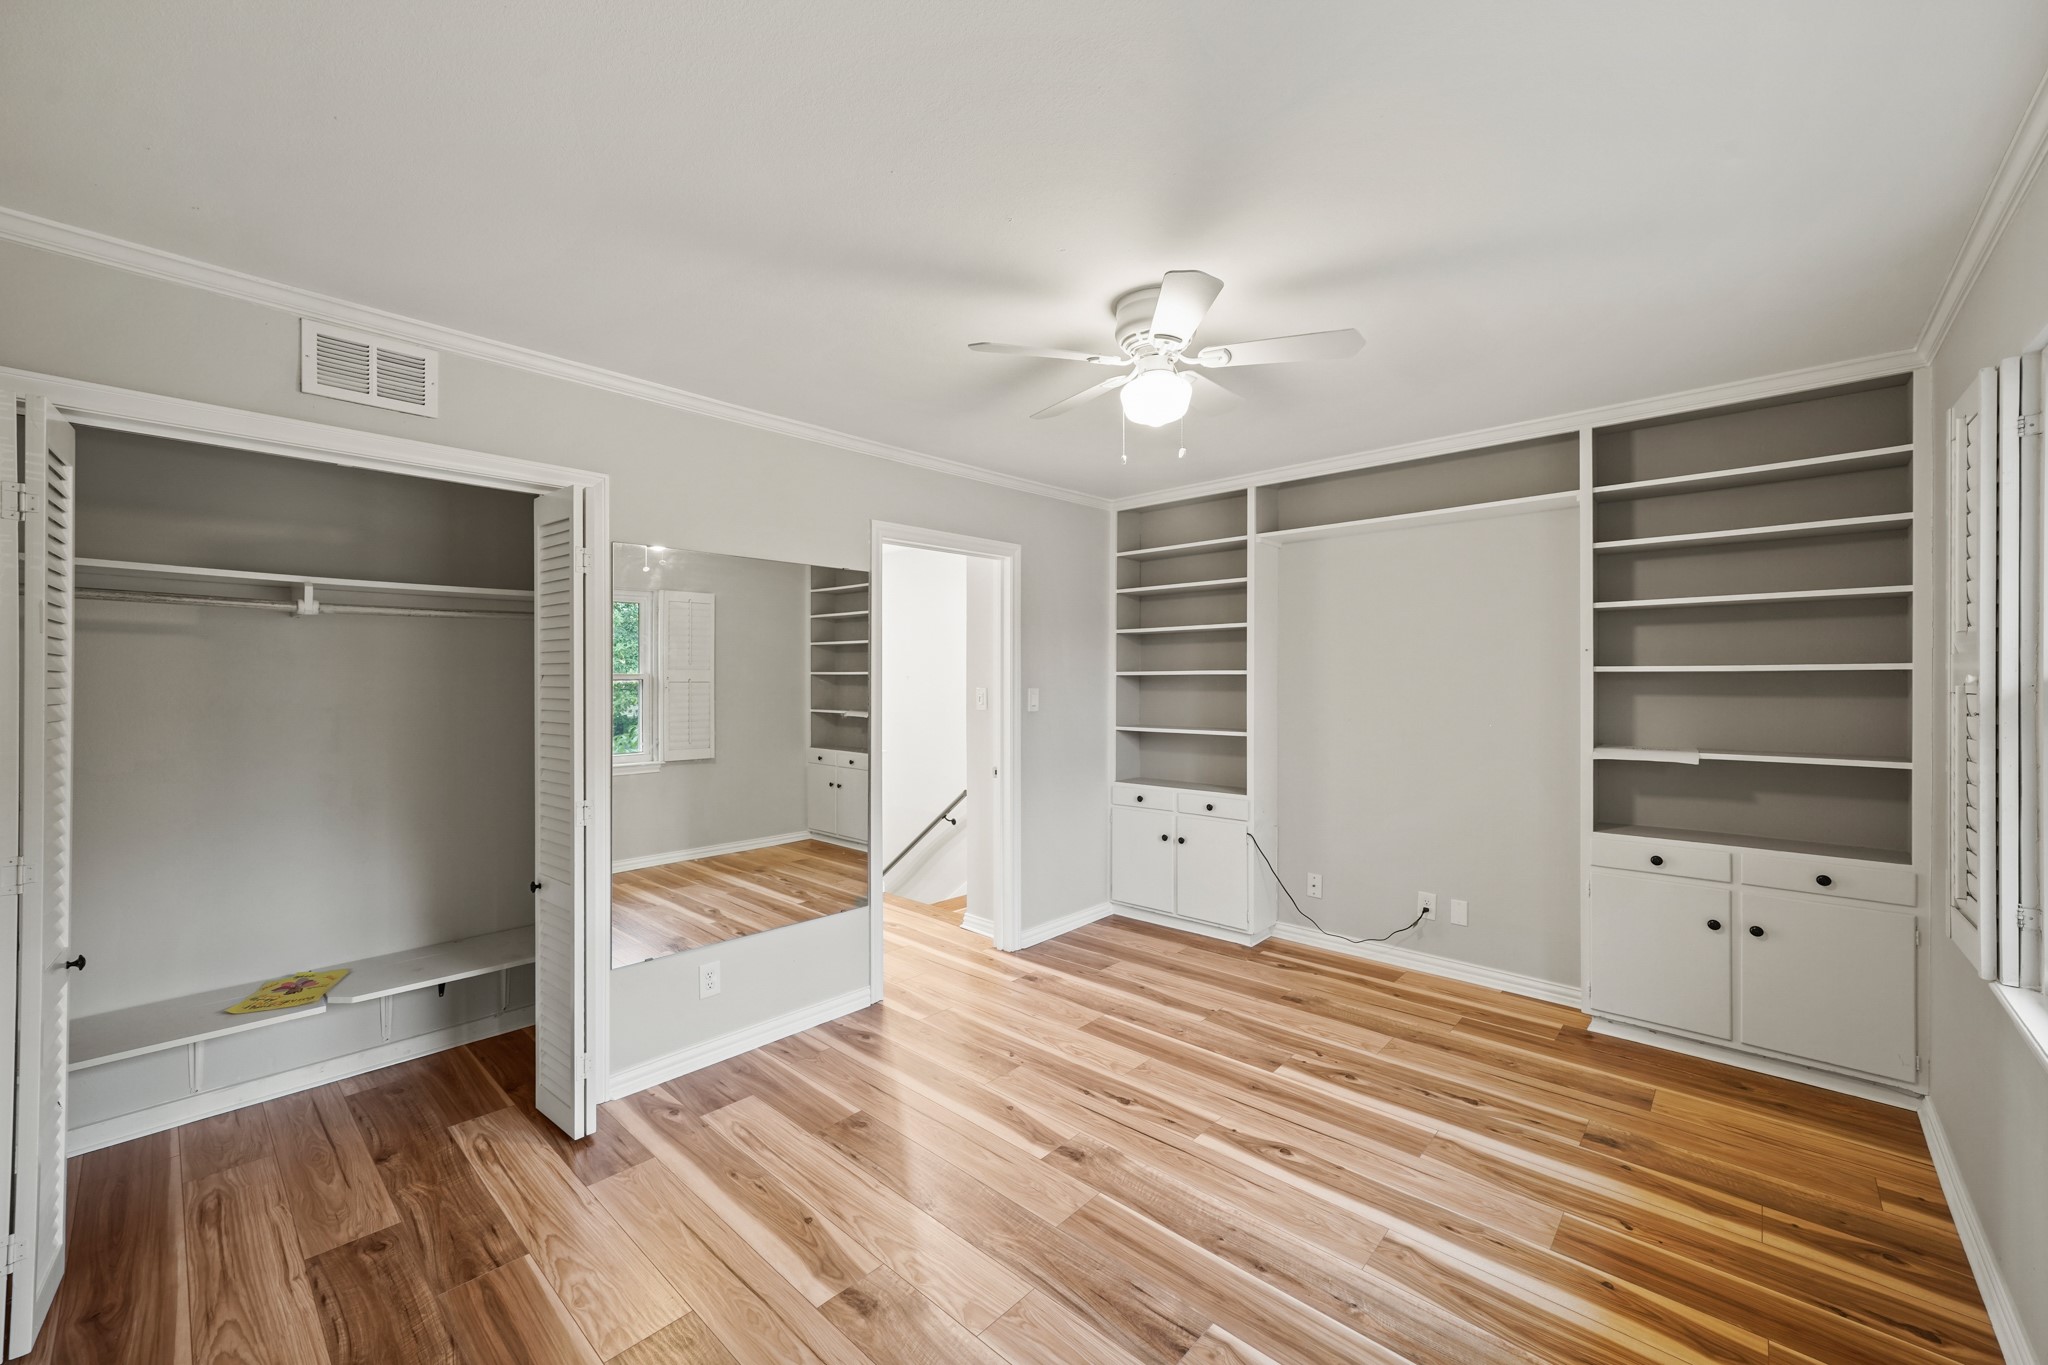 Great extra storage in the bedroom and wood floors.